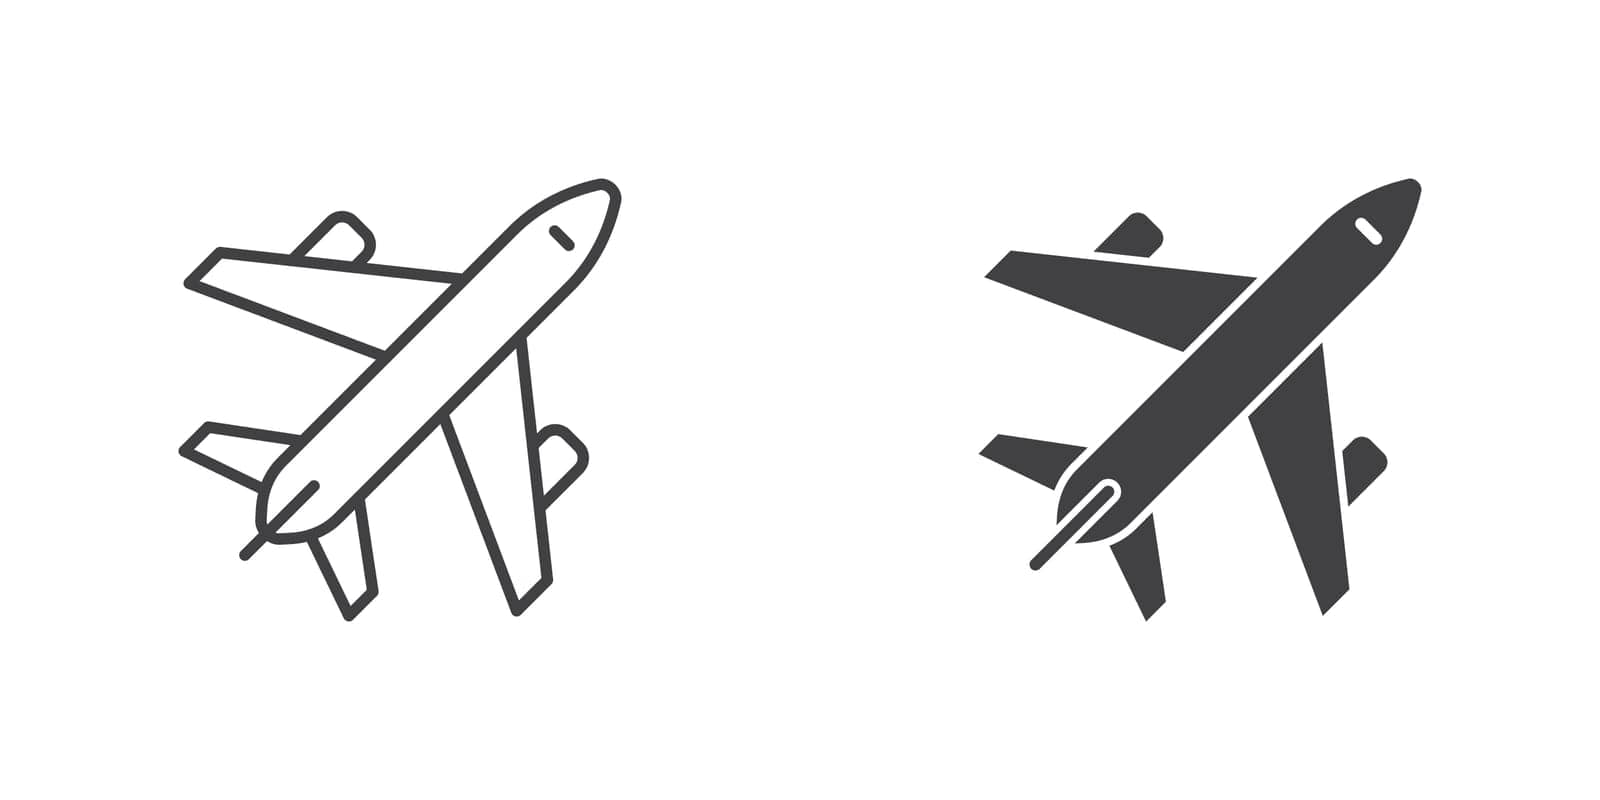 Airplane icon in flat style. Plane vector illustration on isolated background. Transport sign business concept.